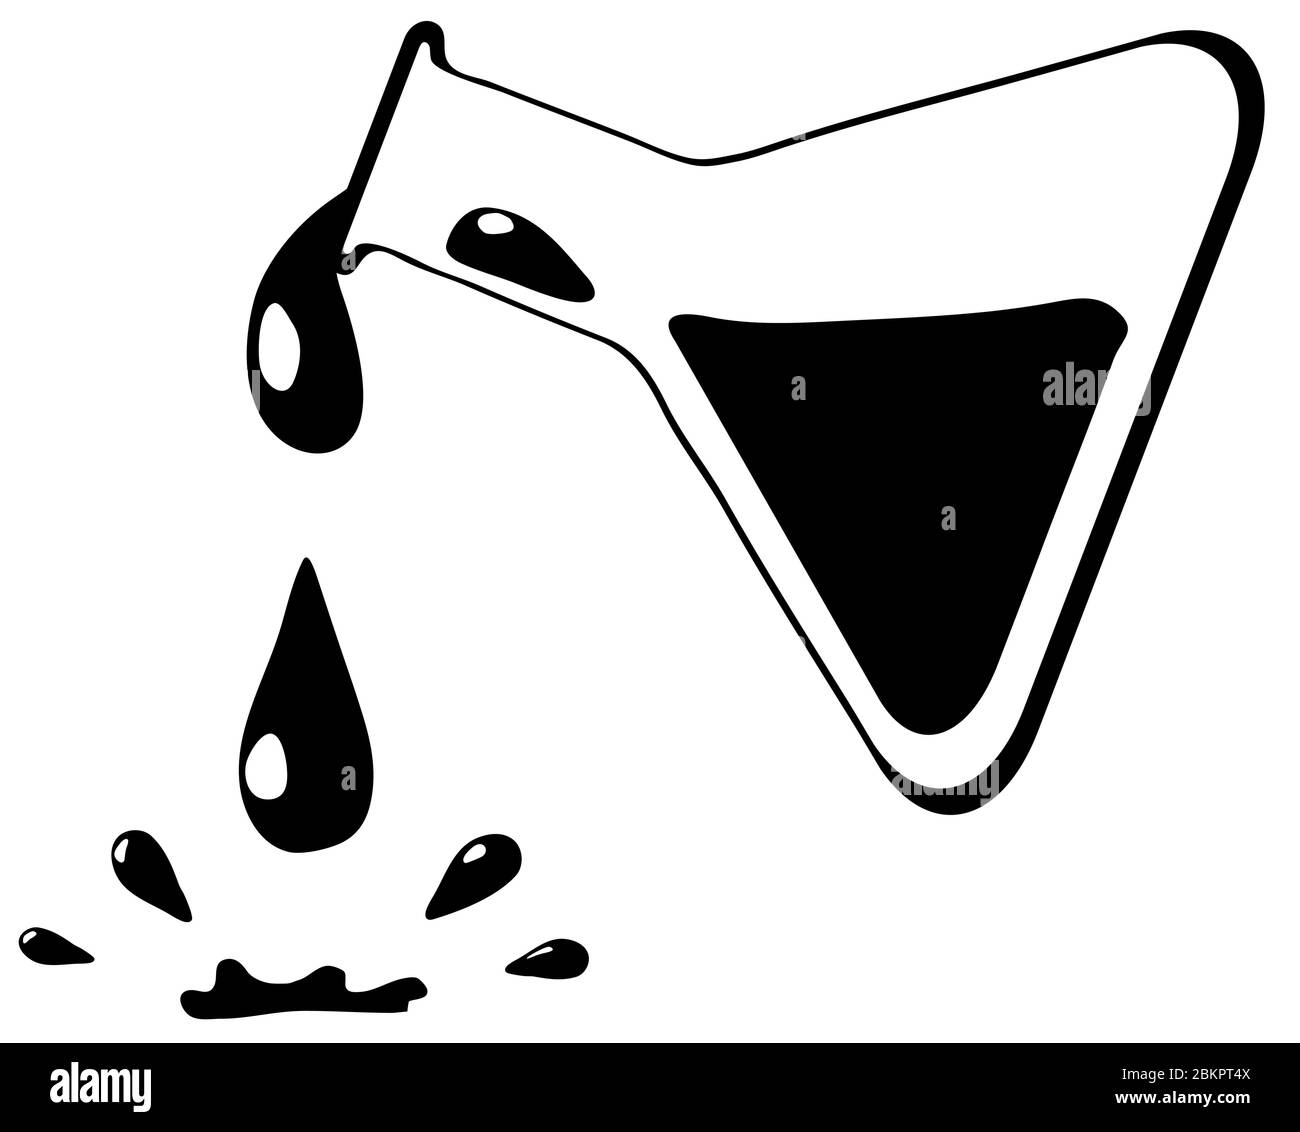 Chemical droplets symbol black, vector illustration, horizontal, isolated Stock Vector